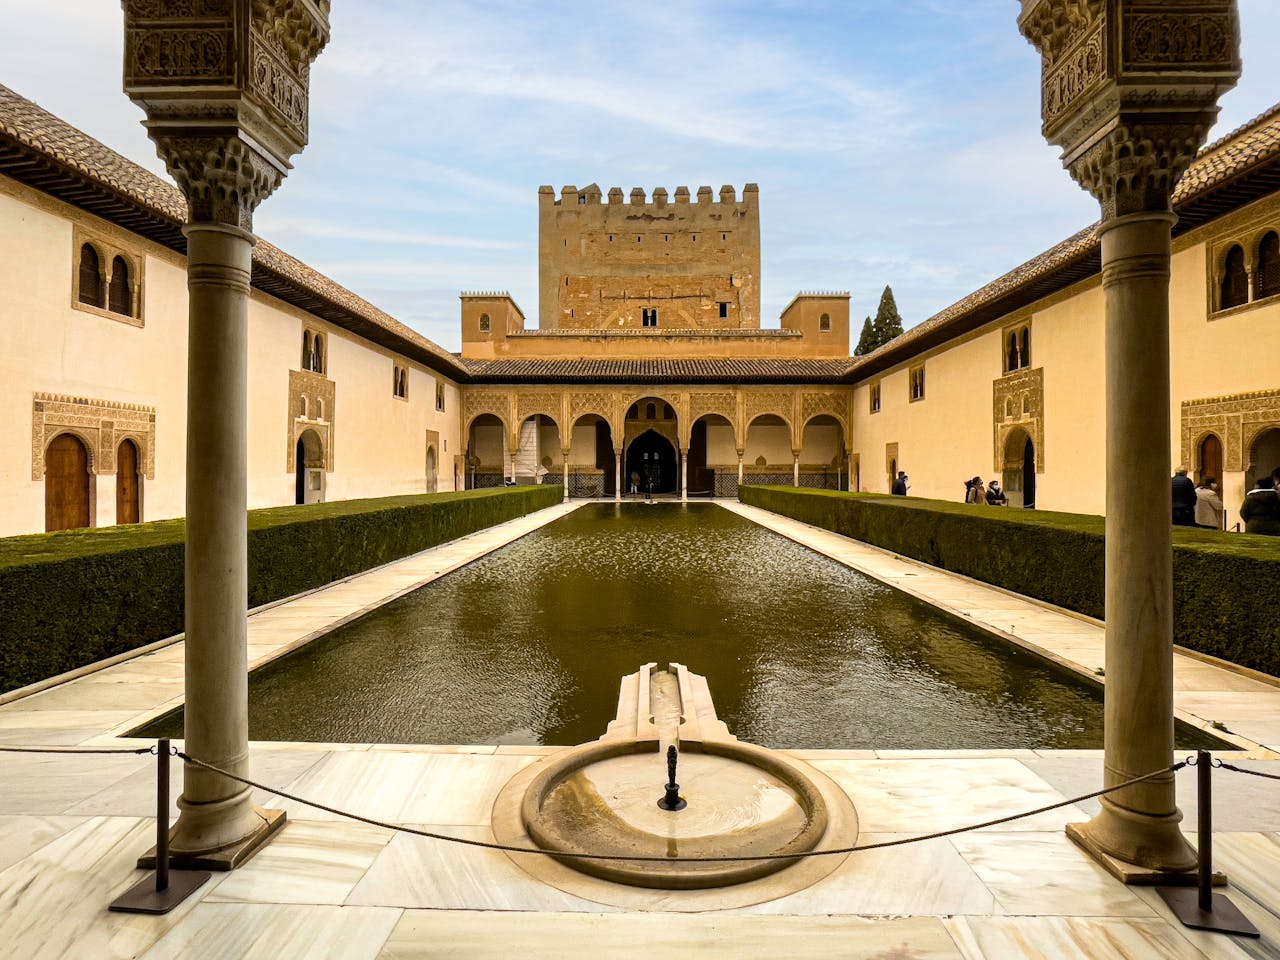 <p>Alhambra is a palace and fortress complex located in Granada, Spain. It is one of the most famous monuments of Islamic architecture and one of the best-preserved palaces of the historic Islamic world.</p>  <p>This historical site is a must-see, if not for its incredible history, then for its exceptional beauty and magnitude.</p>